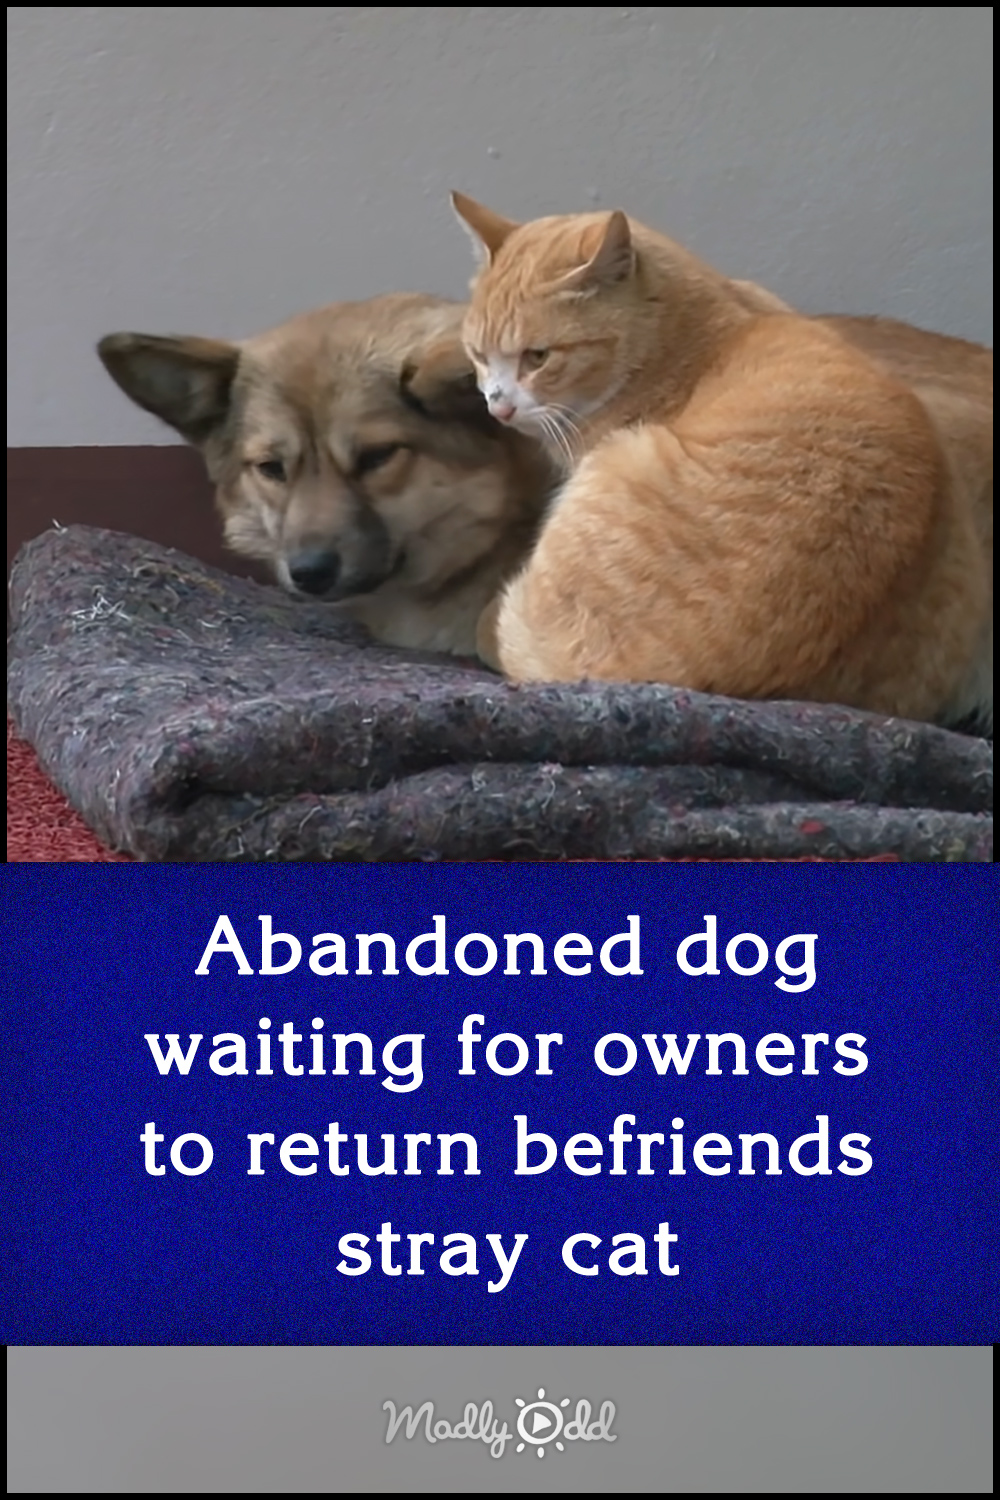 Abandoned dog waiting for owners to return befriends stray cat